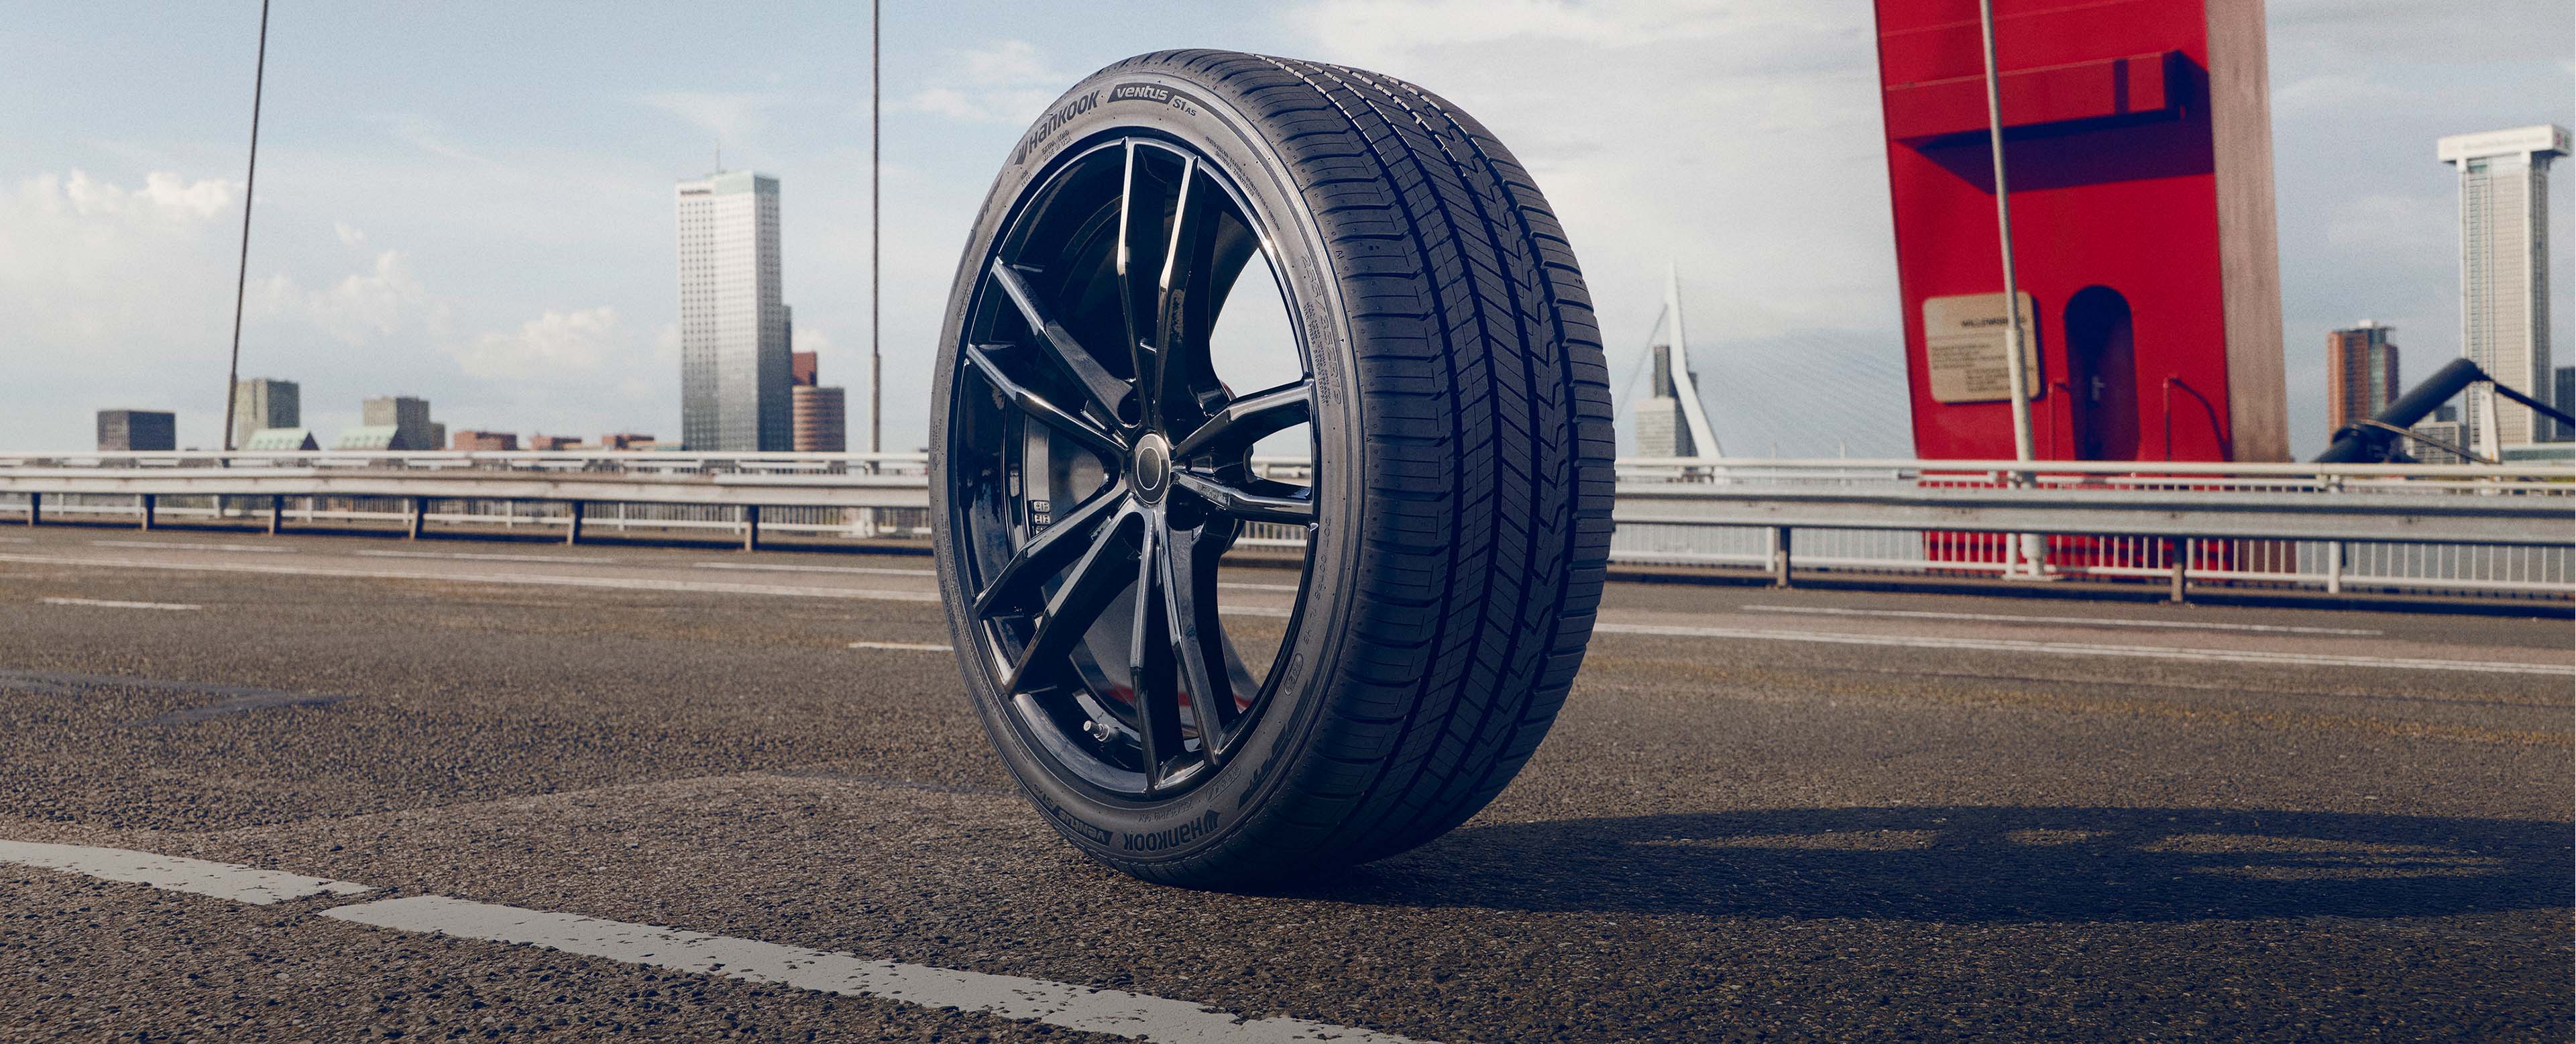 Hankook Tire & Technology-Tires-Ventus-Ventus S1 AS-H125-Sport driving year-round